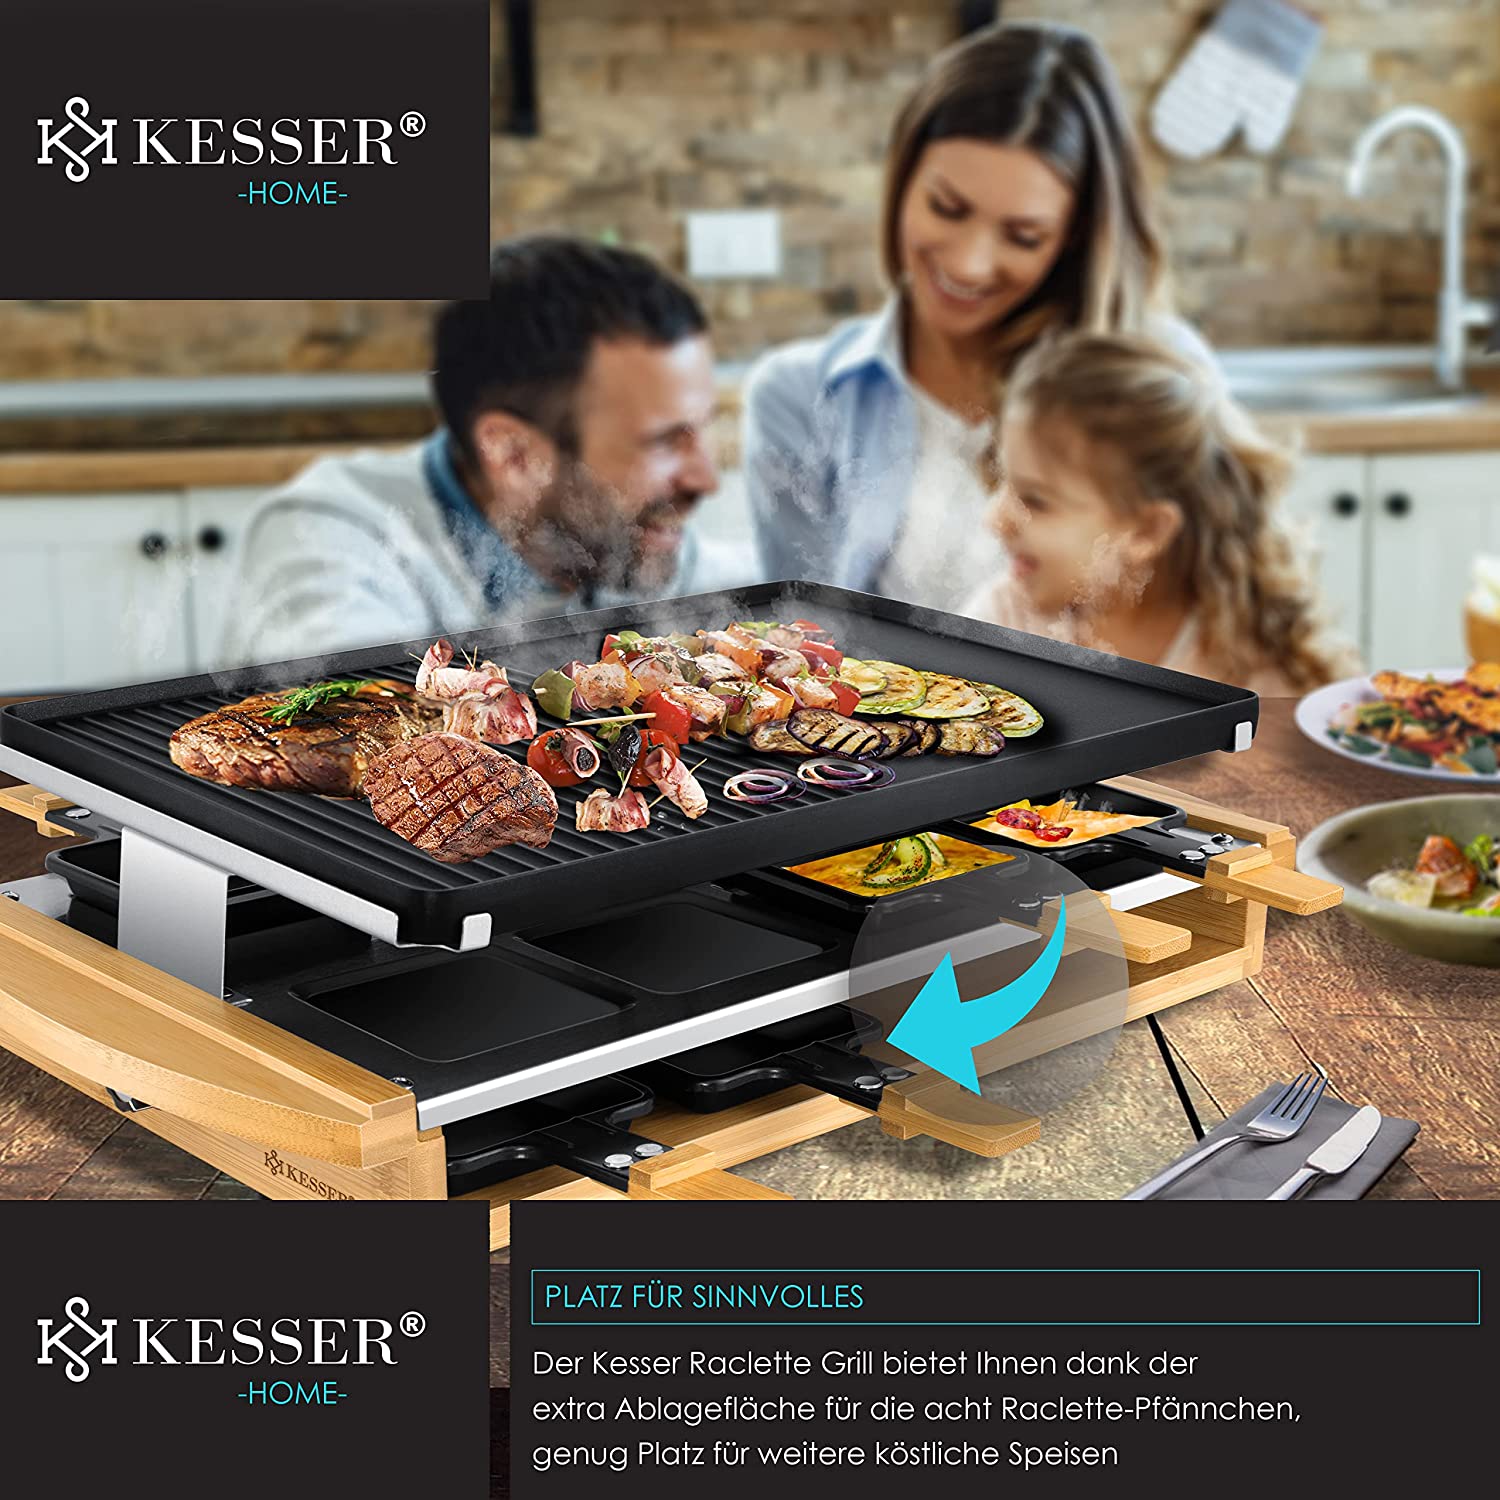 Kesser Raclette grill with natural grill stone - buy at Galaxus